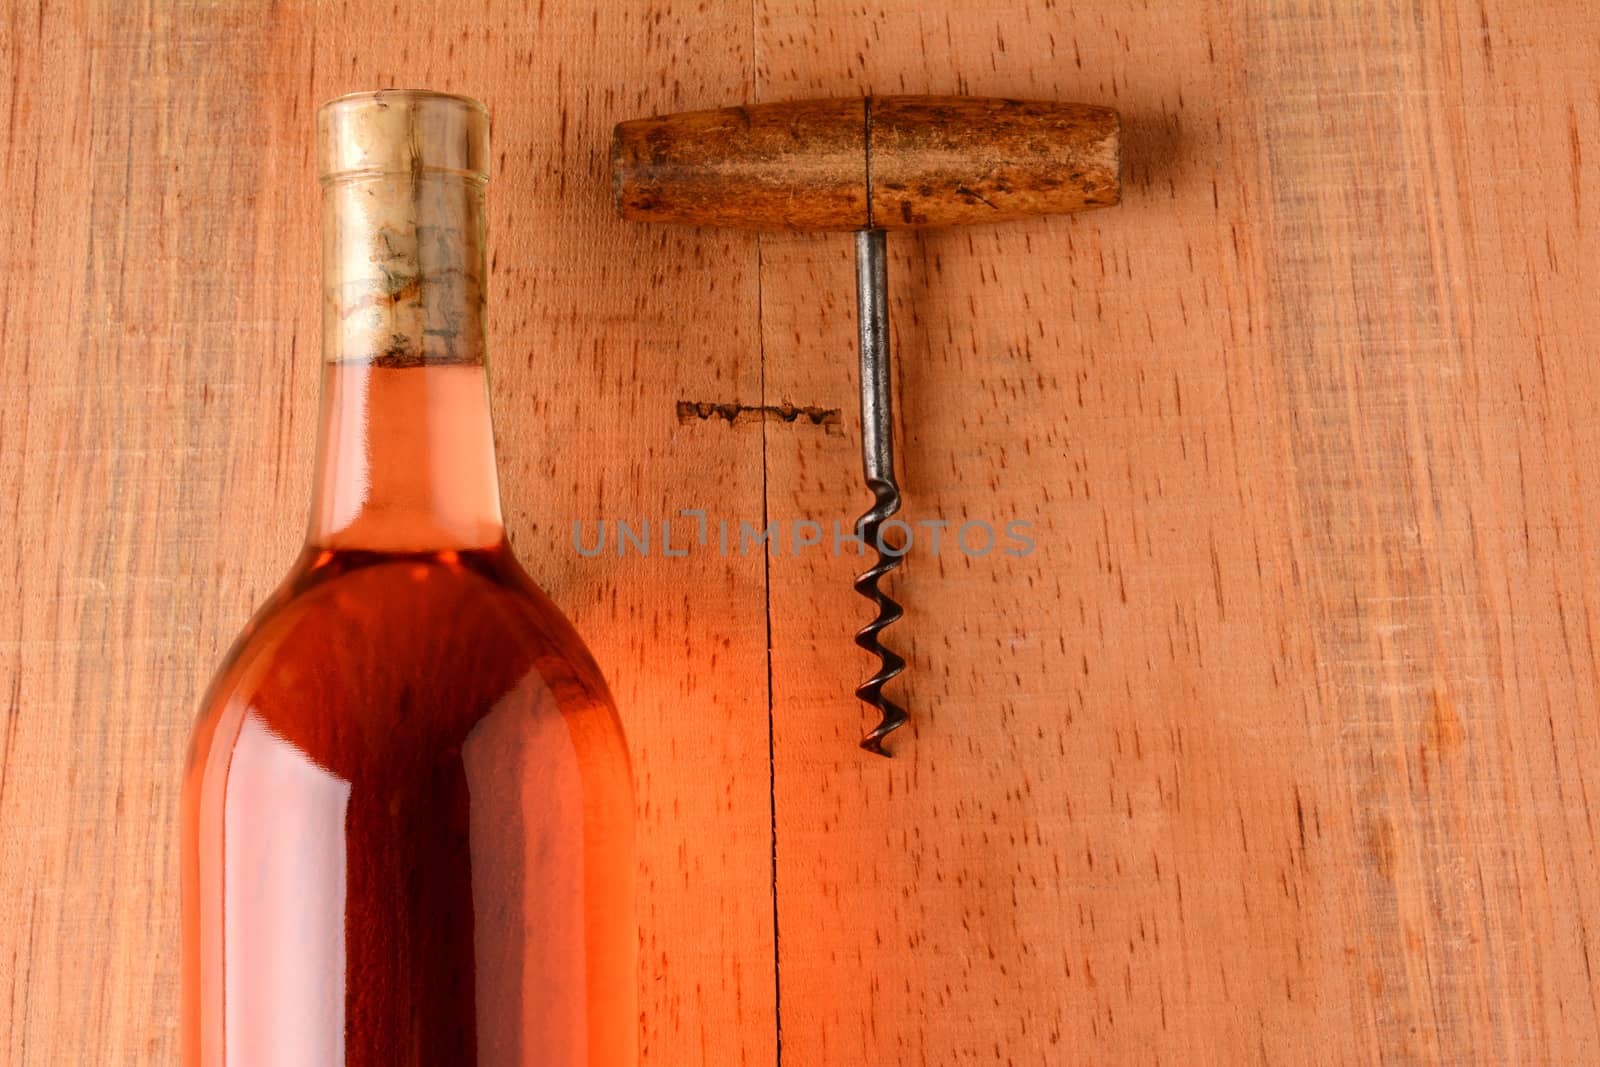 Blush Wine and Corkscrew on Wood by sCukrov